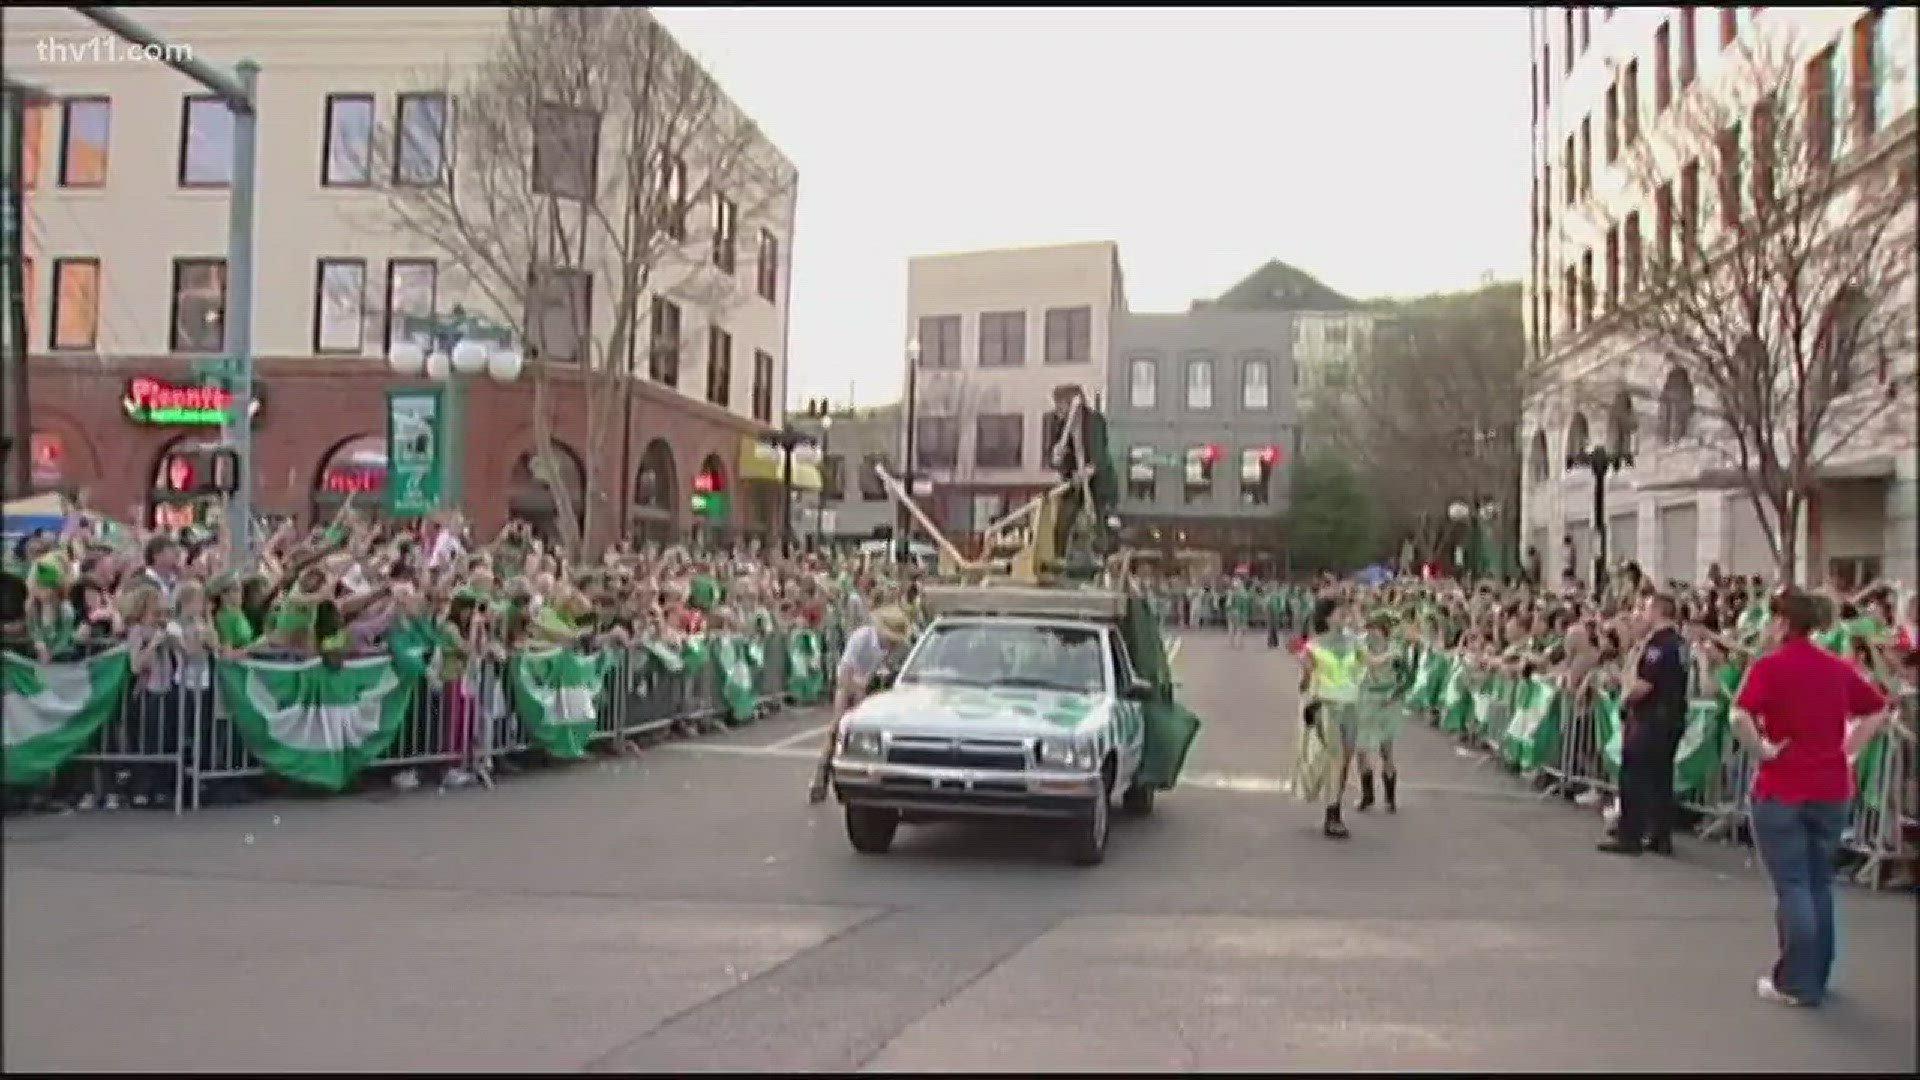 The World's Shortest St. Patrick's Day parade is gearing up as well as one of Oaklawn's most famous races - not to mention its the start of Spring Break in Arkansas.